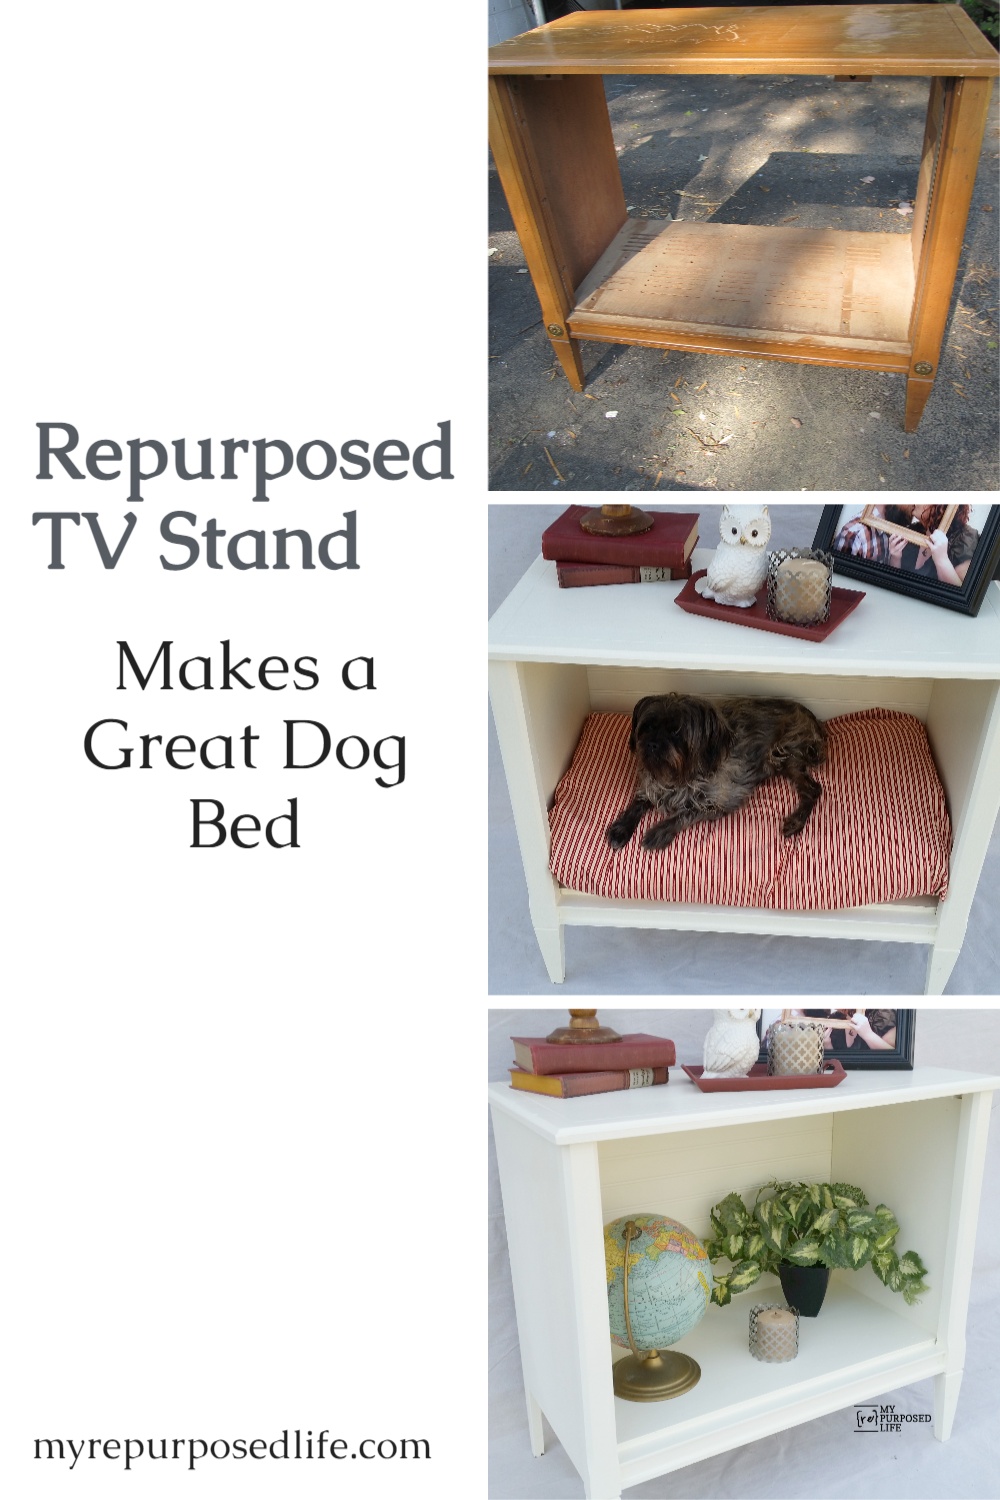 A Repurposed tv stand is transformed into a great cabinet, side table, and can even be used as a dog bed. This is a great weekend project for you to do. #MyRepurposedLife #repurpose #upcycle #tvstand #diy #dogbed via @repurposedlife